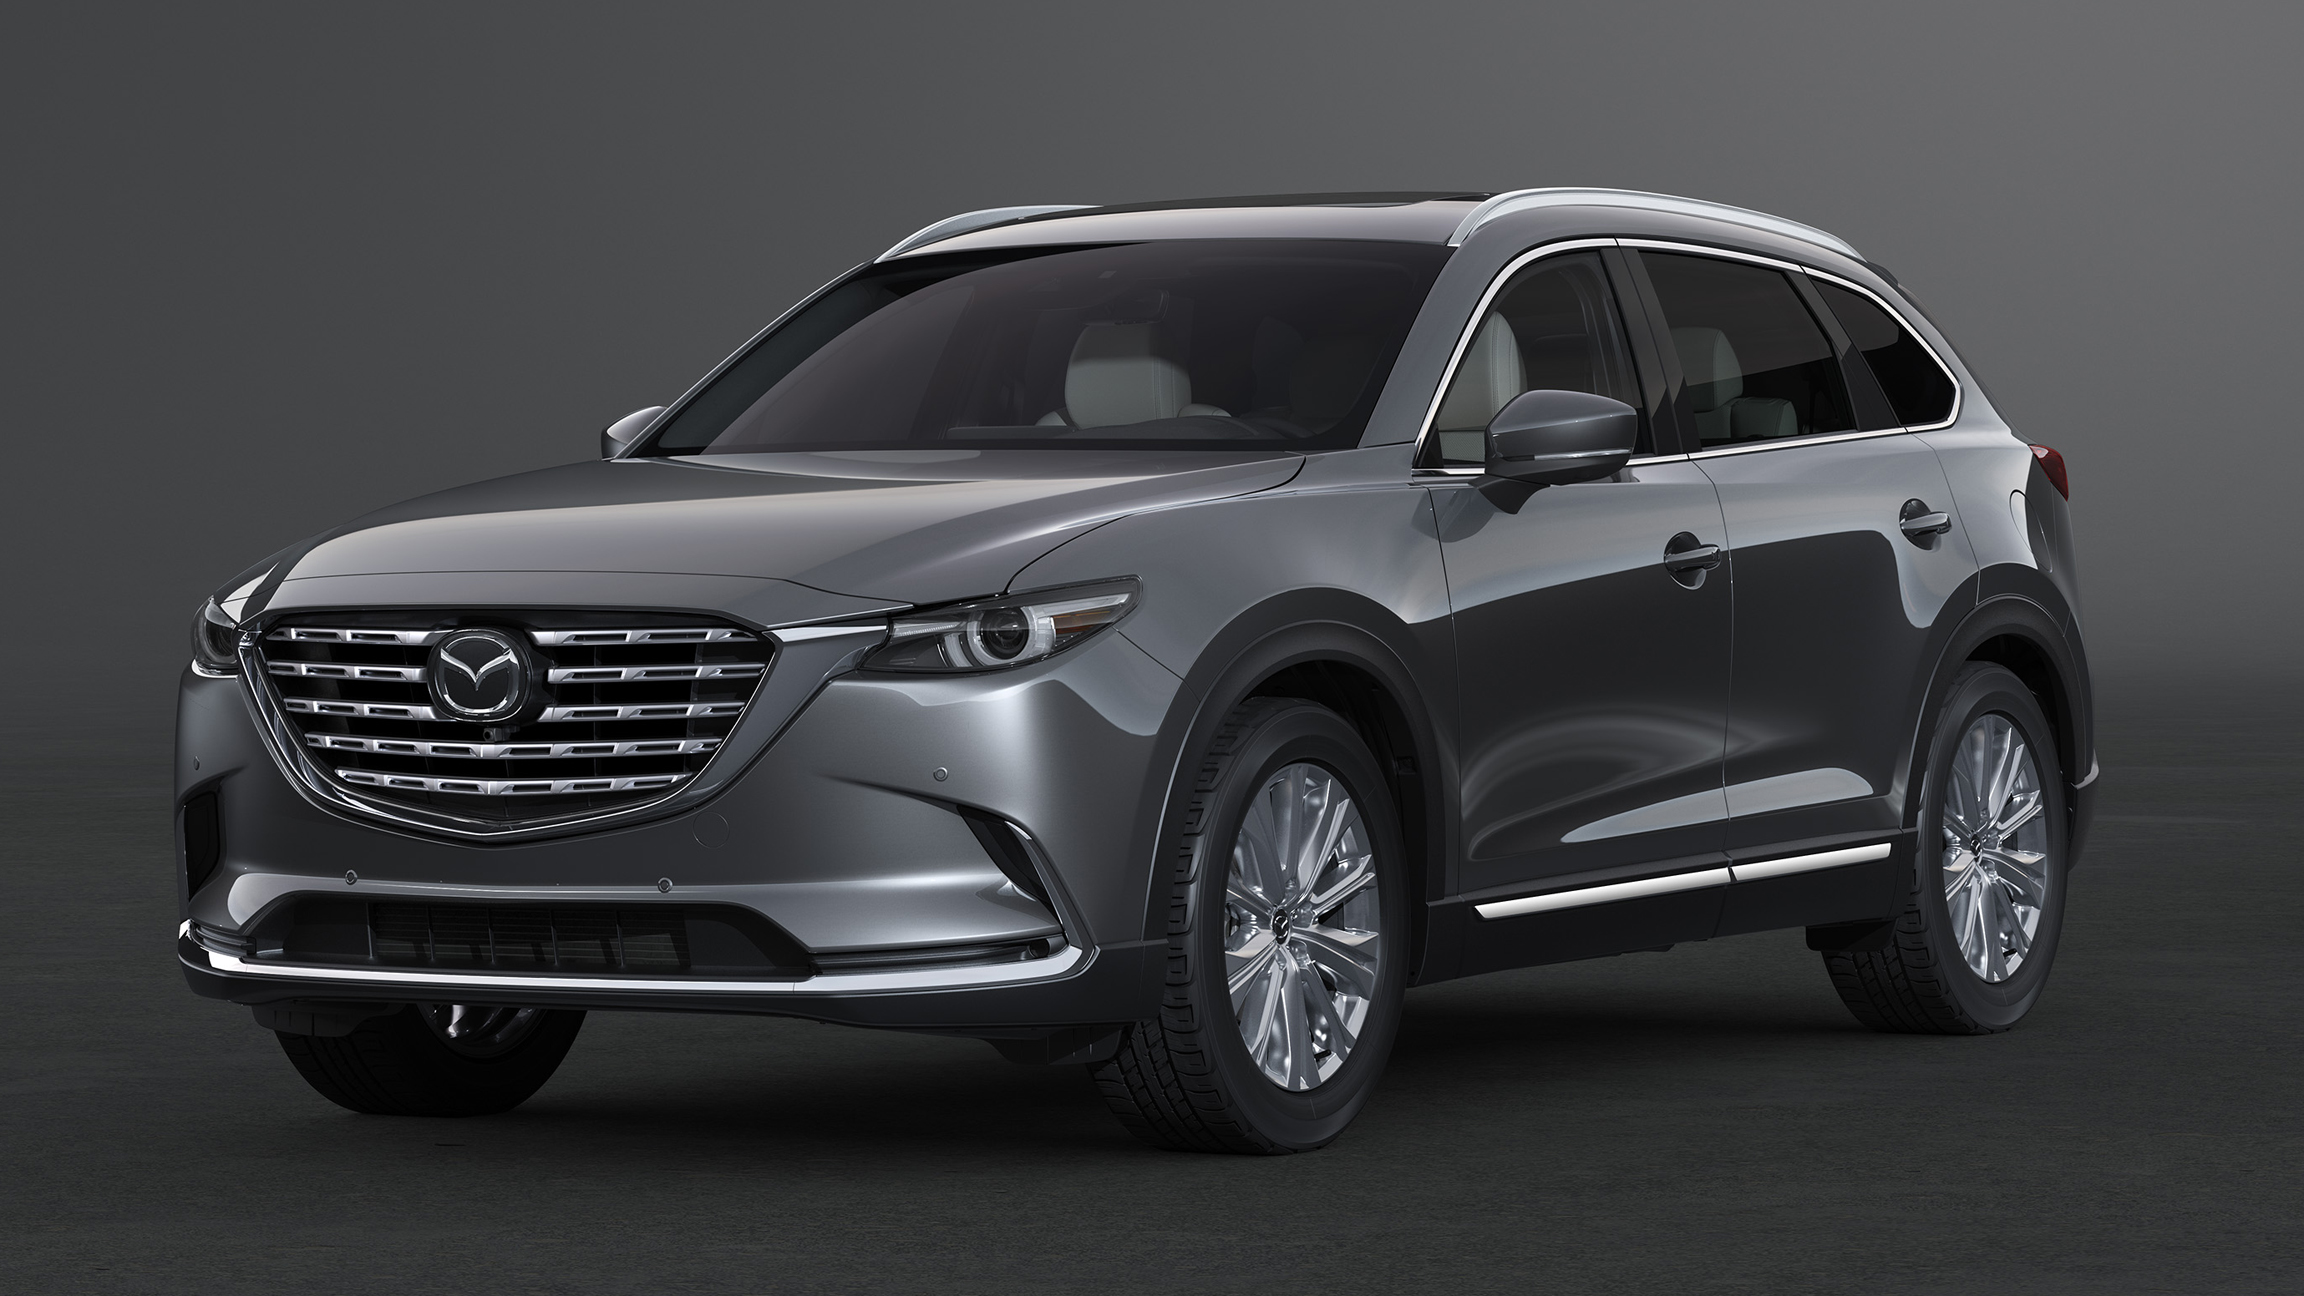 2021 Mazda CX-9 Review | Pricing, specs, features, fuel economy and